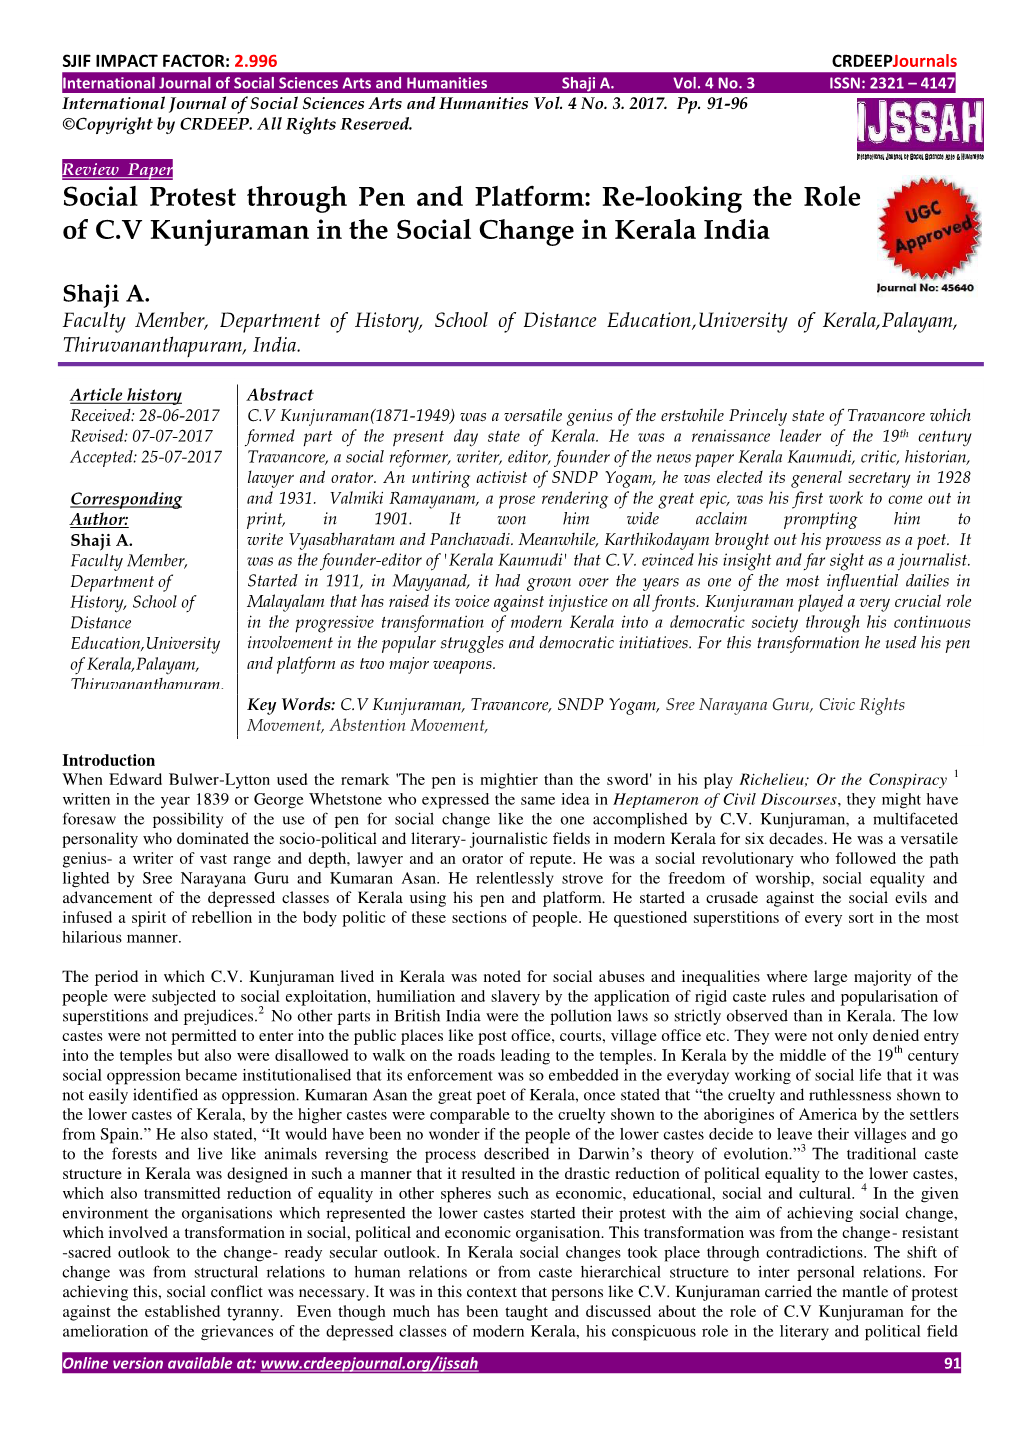 Re-Looking the Role of CV Kunjuraman in the Social Change